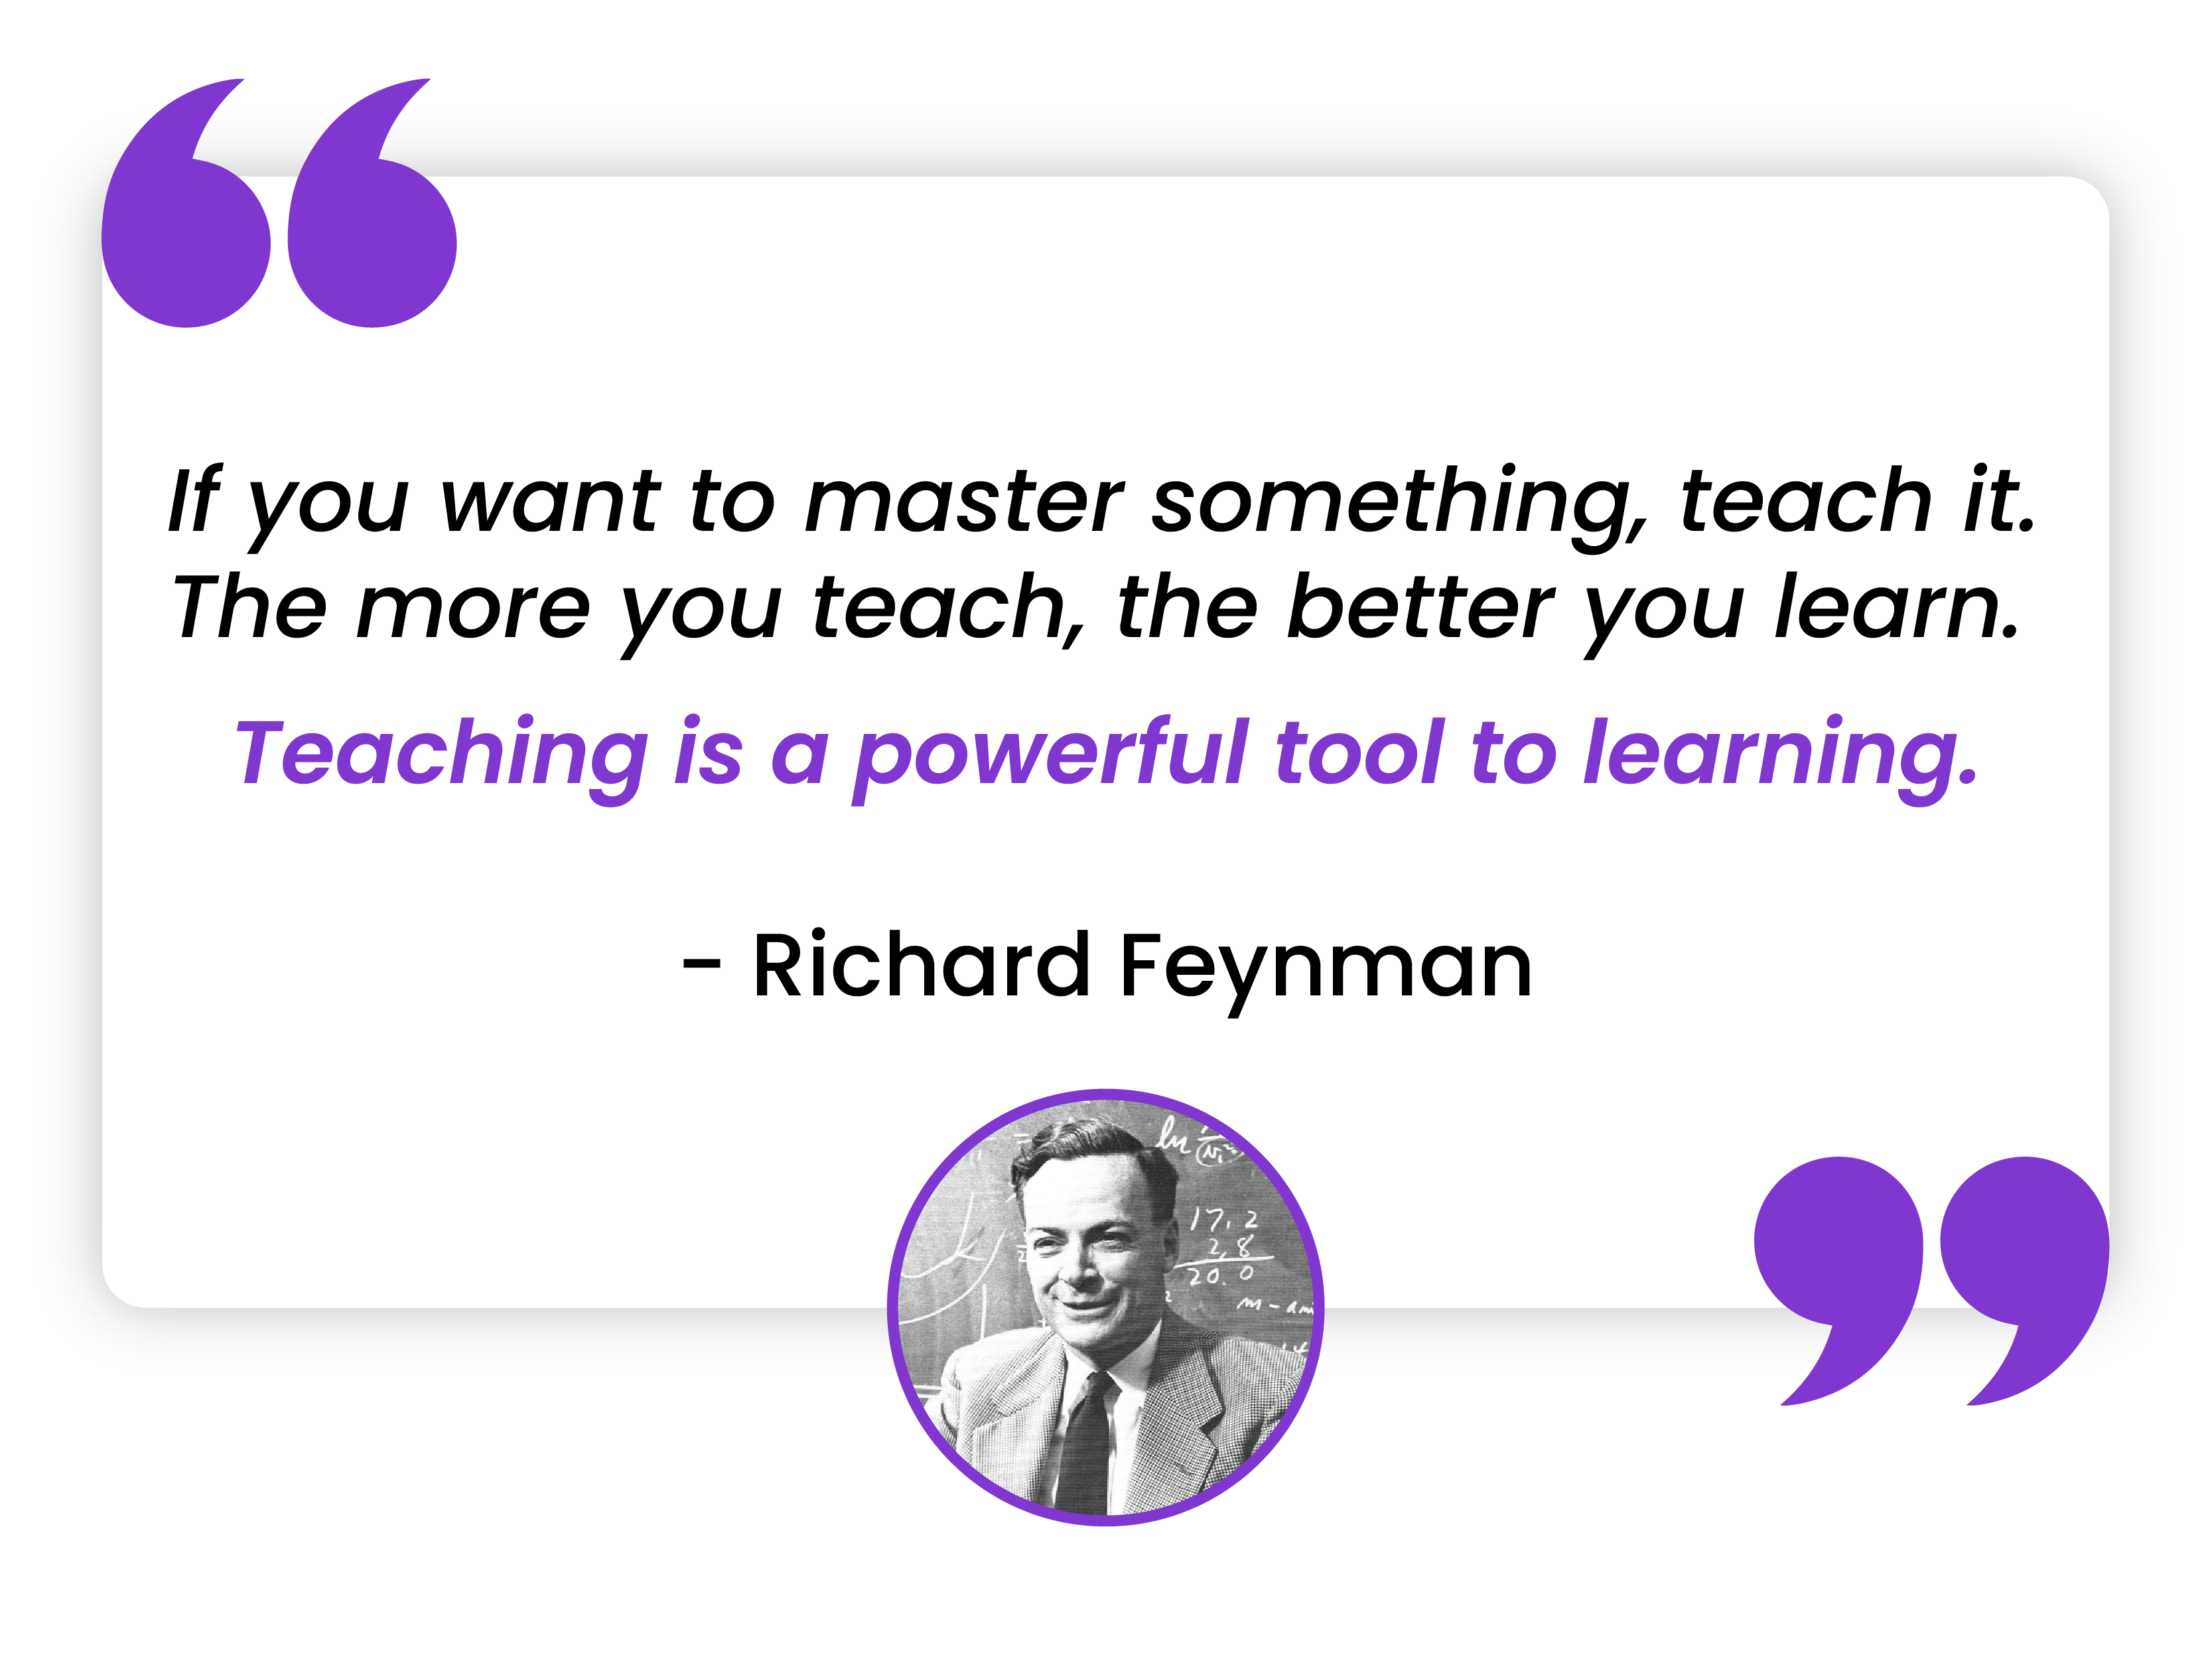 Famous quote by Richard Feynman